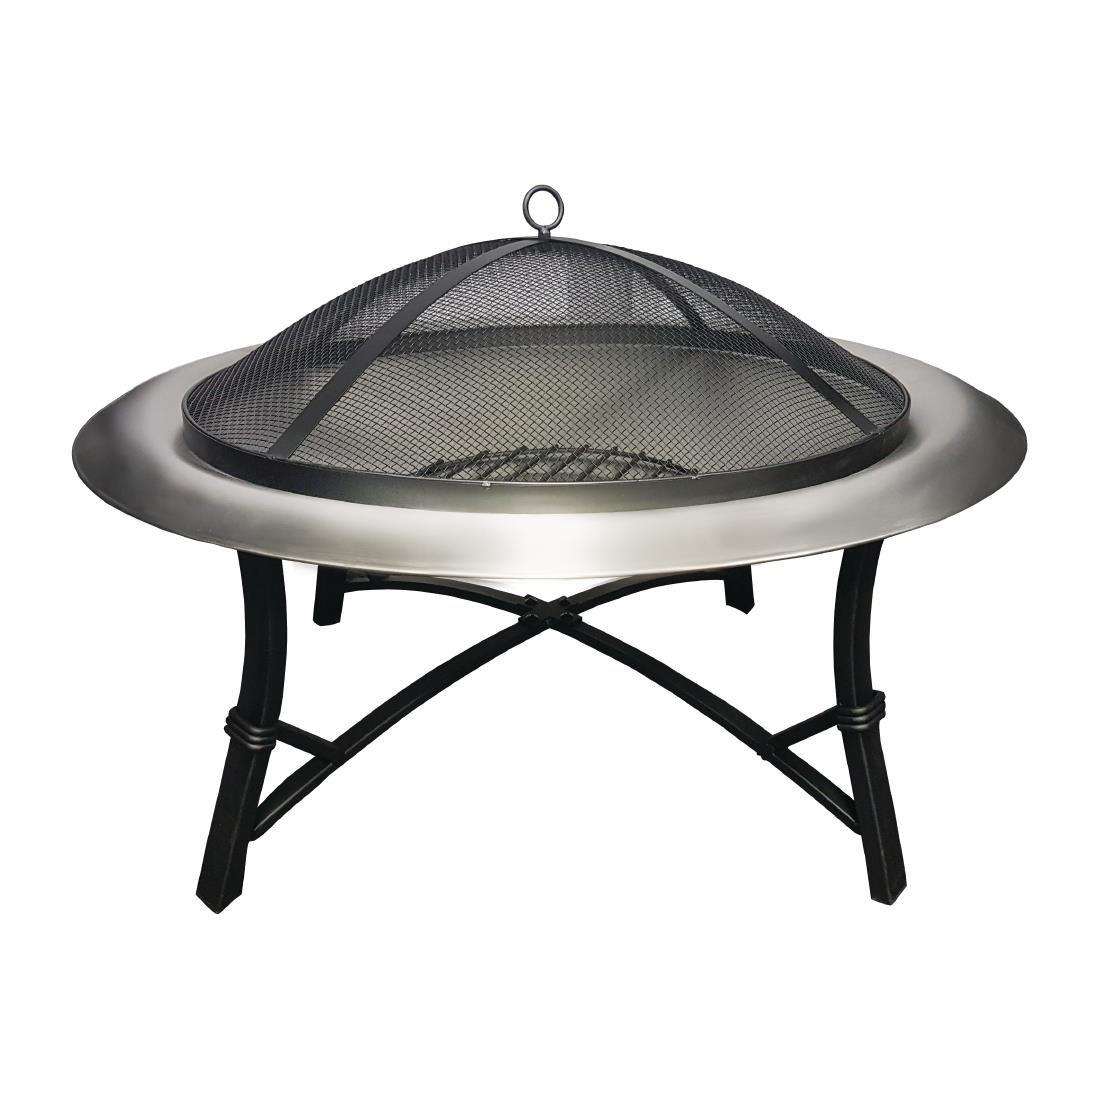 Lifestyle Prima Stainless Steel Fire Pit - Each - CS484 - 1